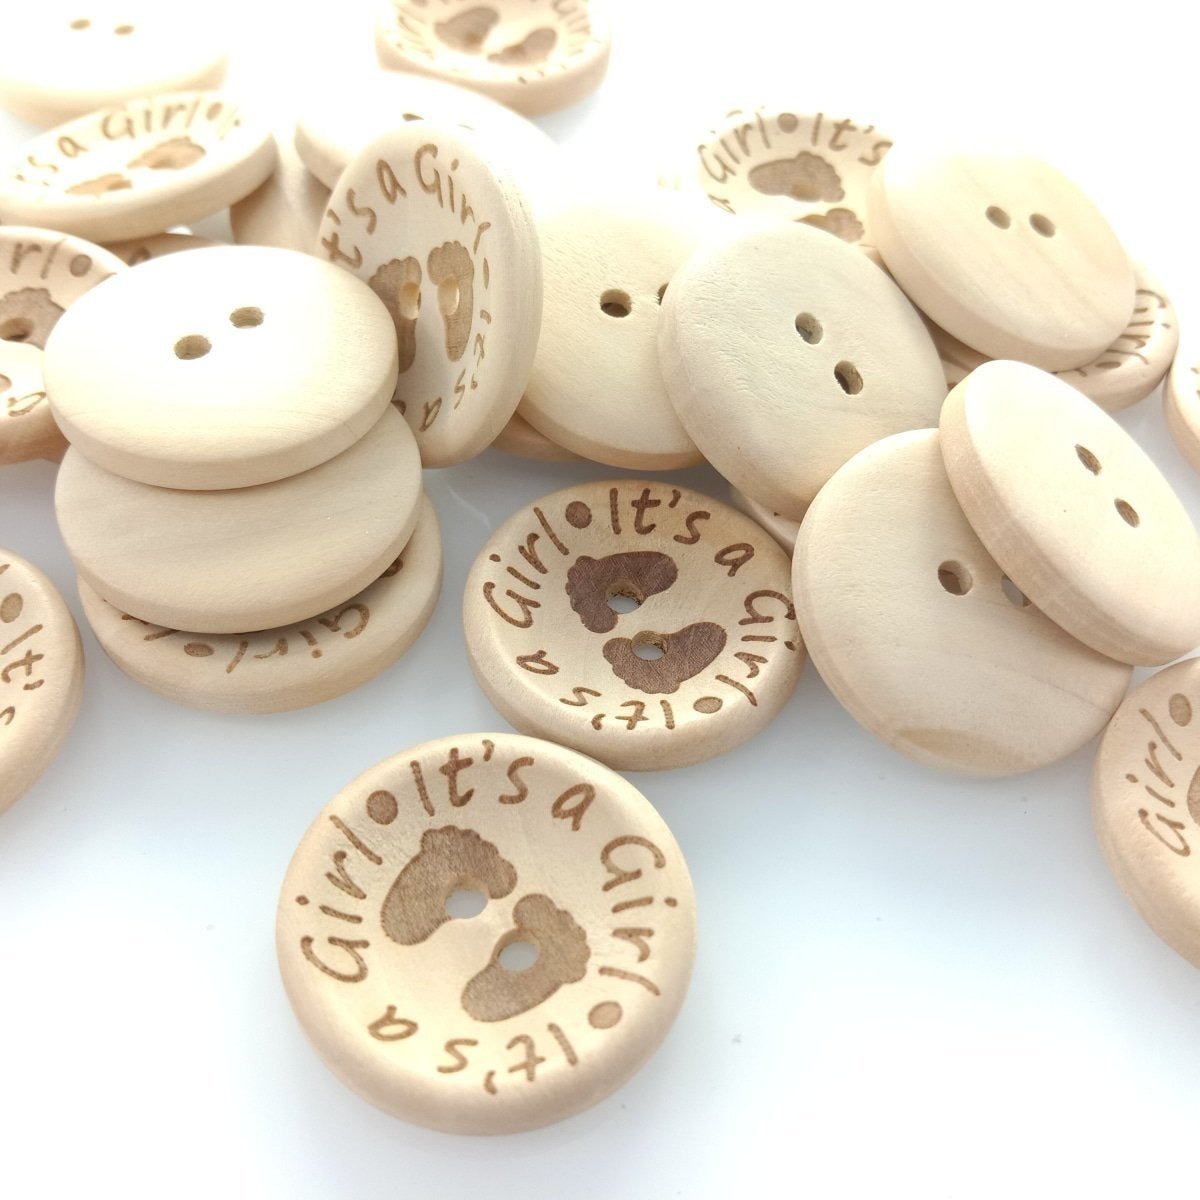 15/20/25mm It's a Girl/Boy Wooden Button Natural Wood Sewing Baby Clothing Buttons - It's a Girl 25mm 30pcs - - Asia Sell